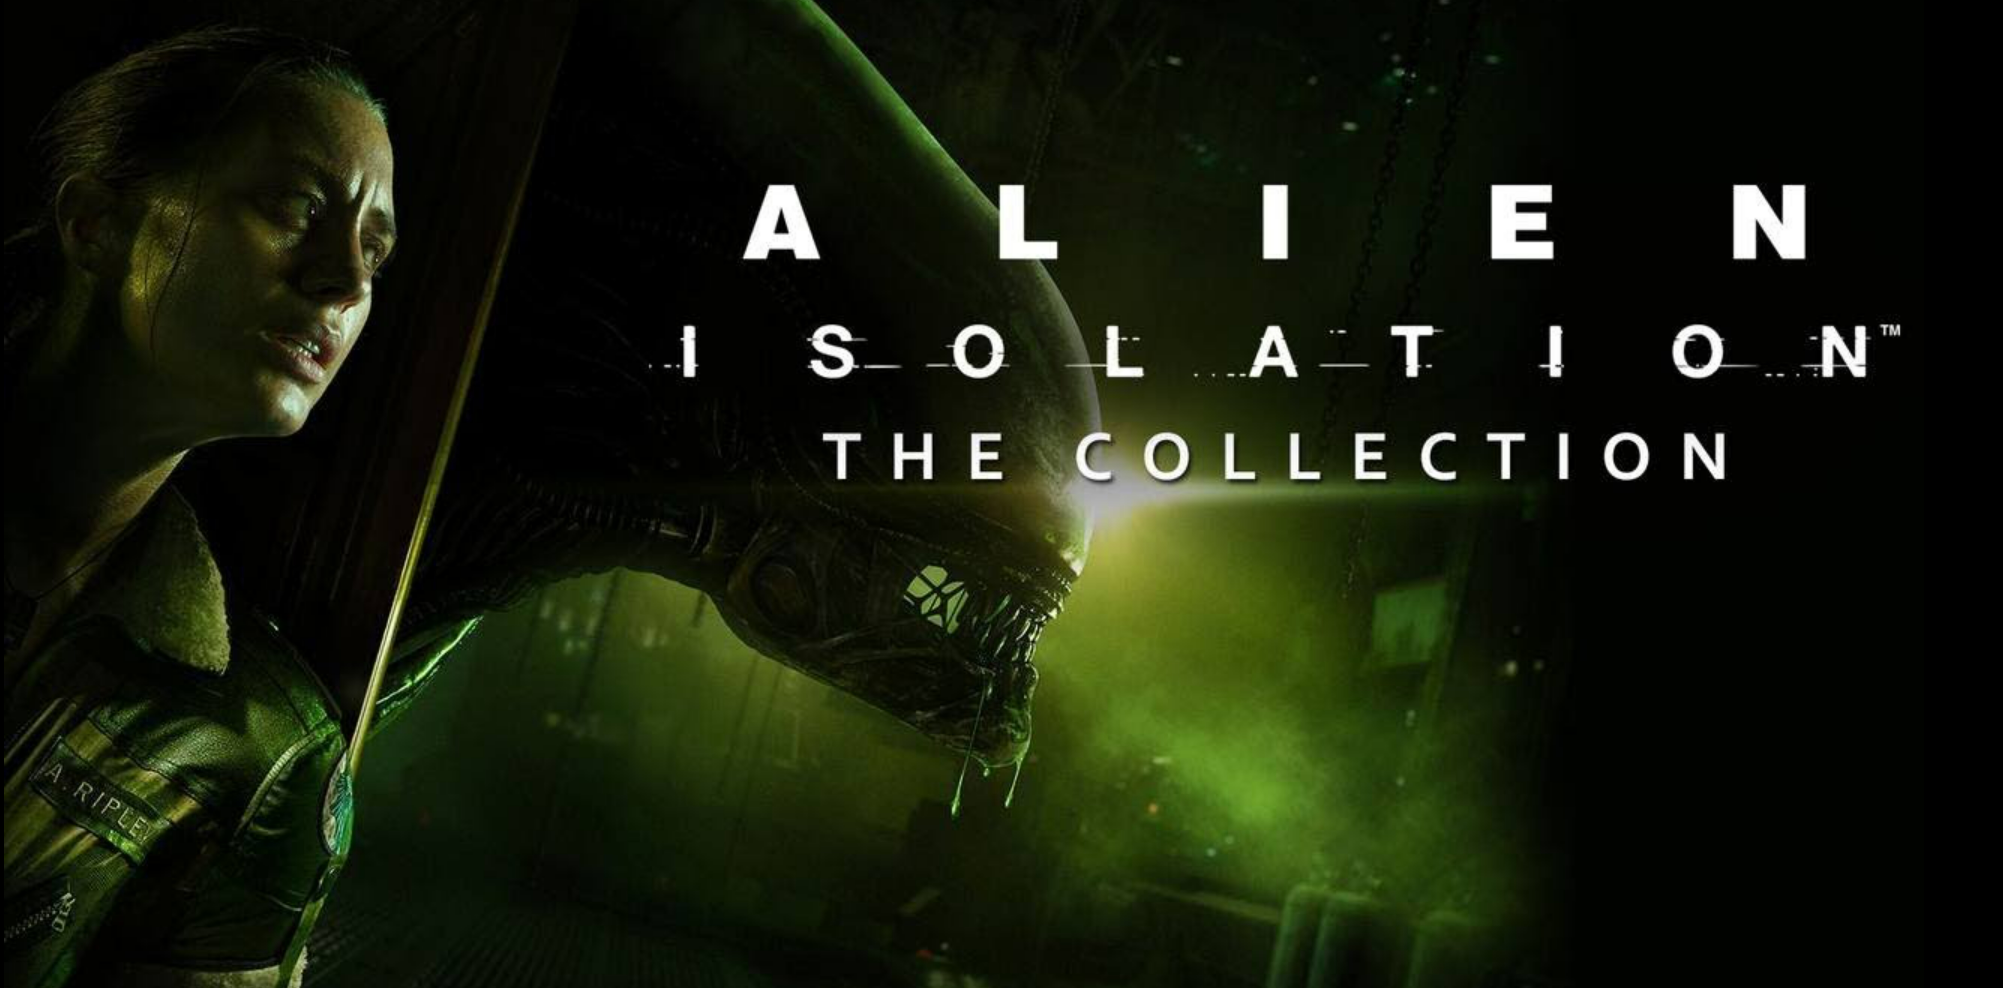 Alien isolation the collection steam (120) фото